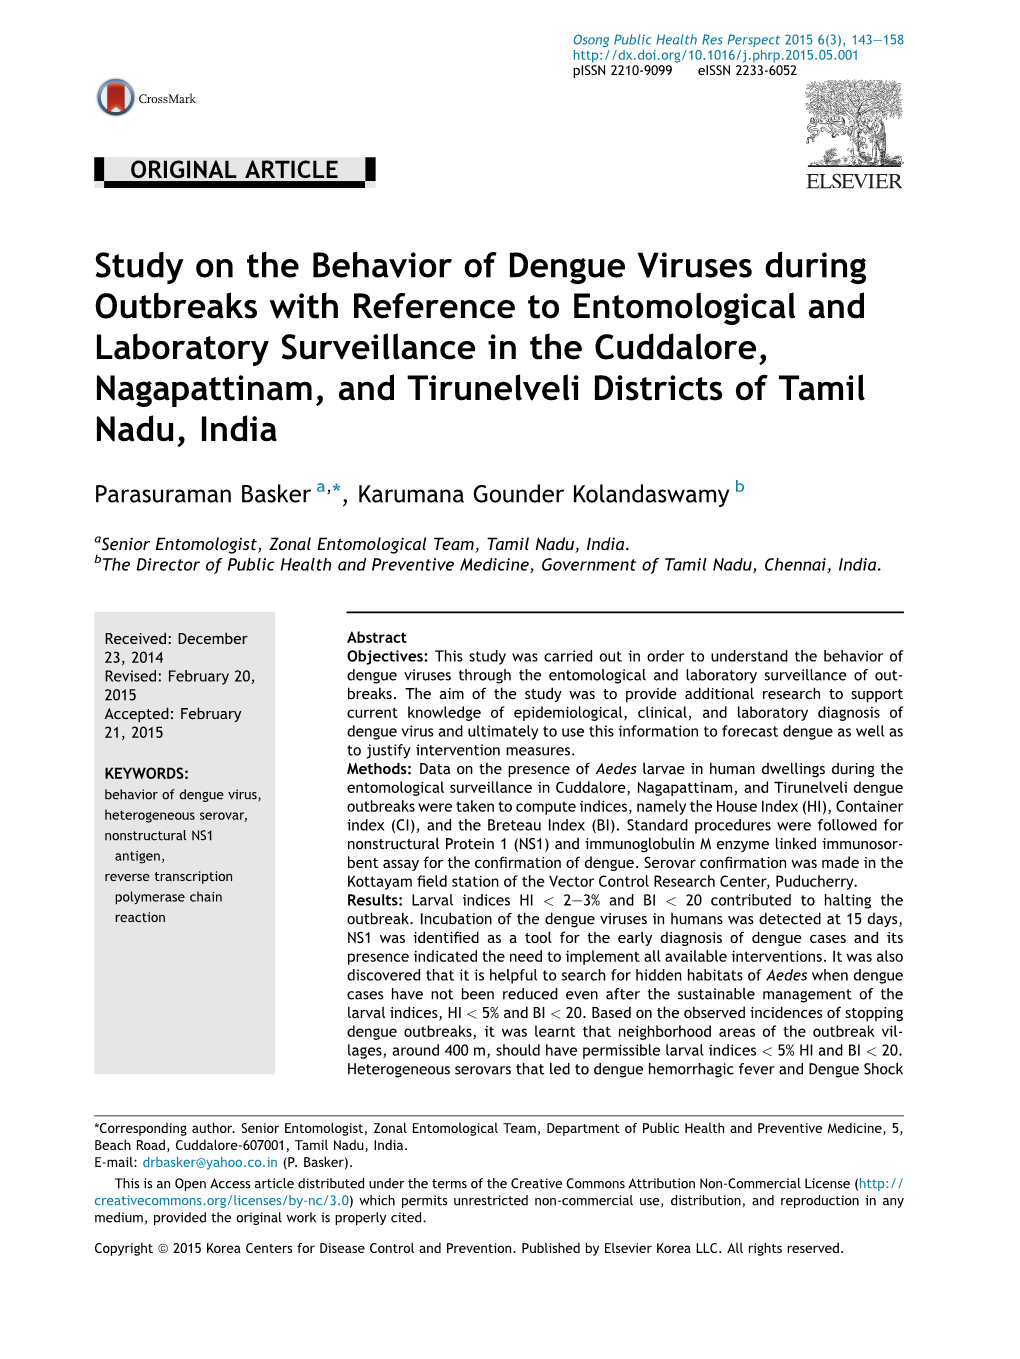 Study on the Behavior of Dengue Viruses During Outbreaks with Reference to Entomological and Laboratory Surveillance in the Cudd